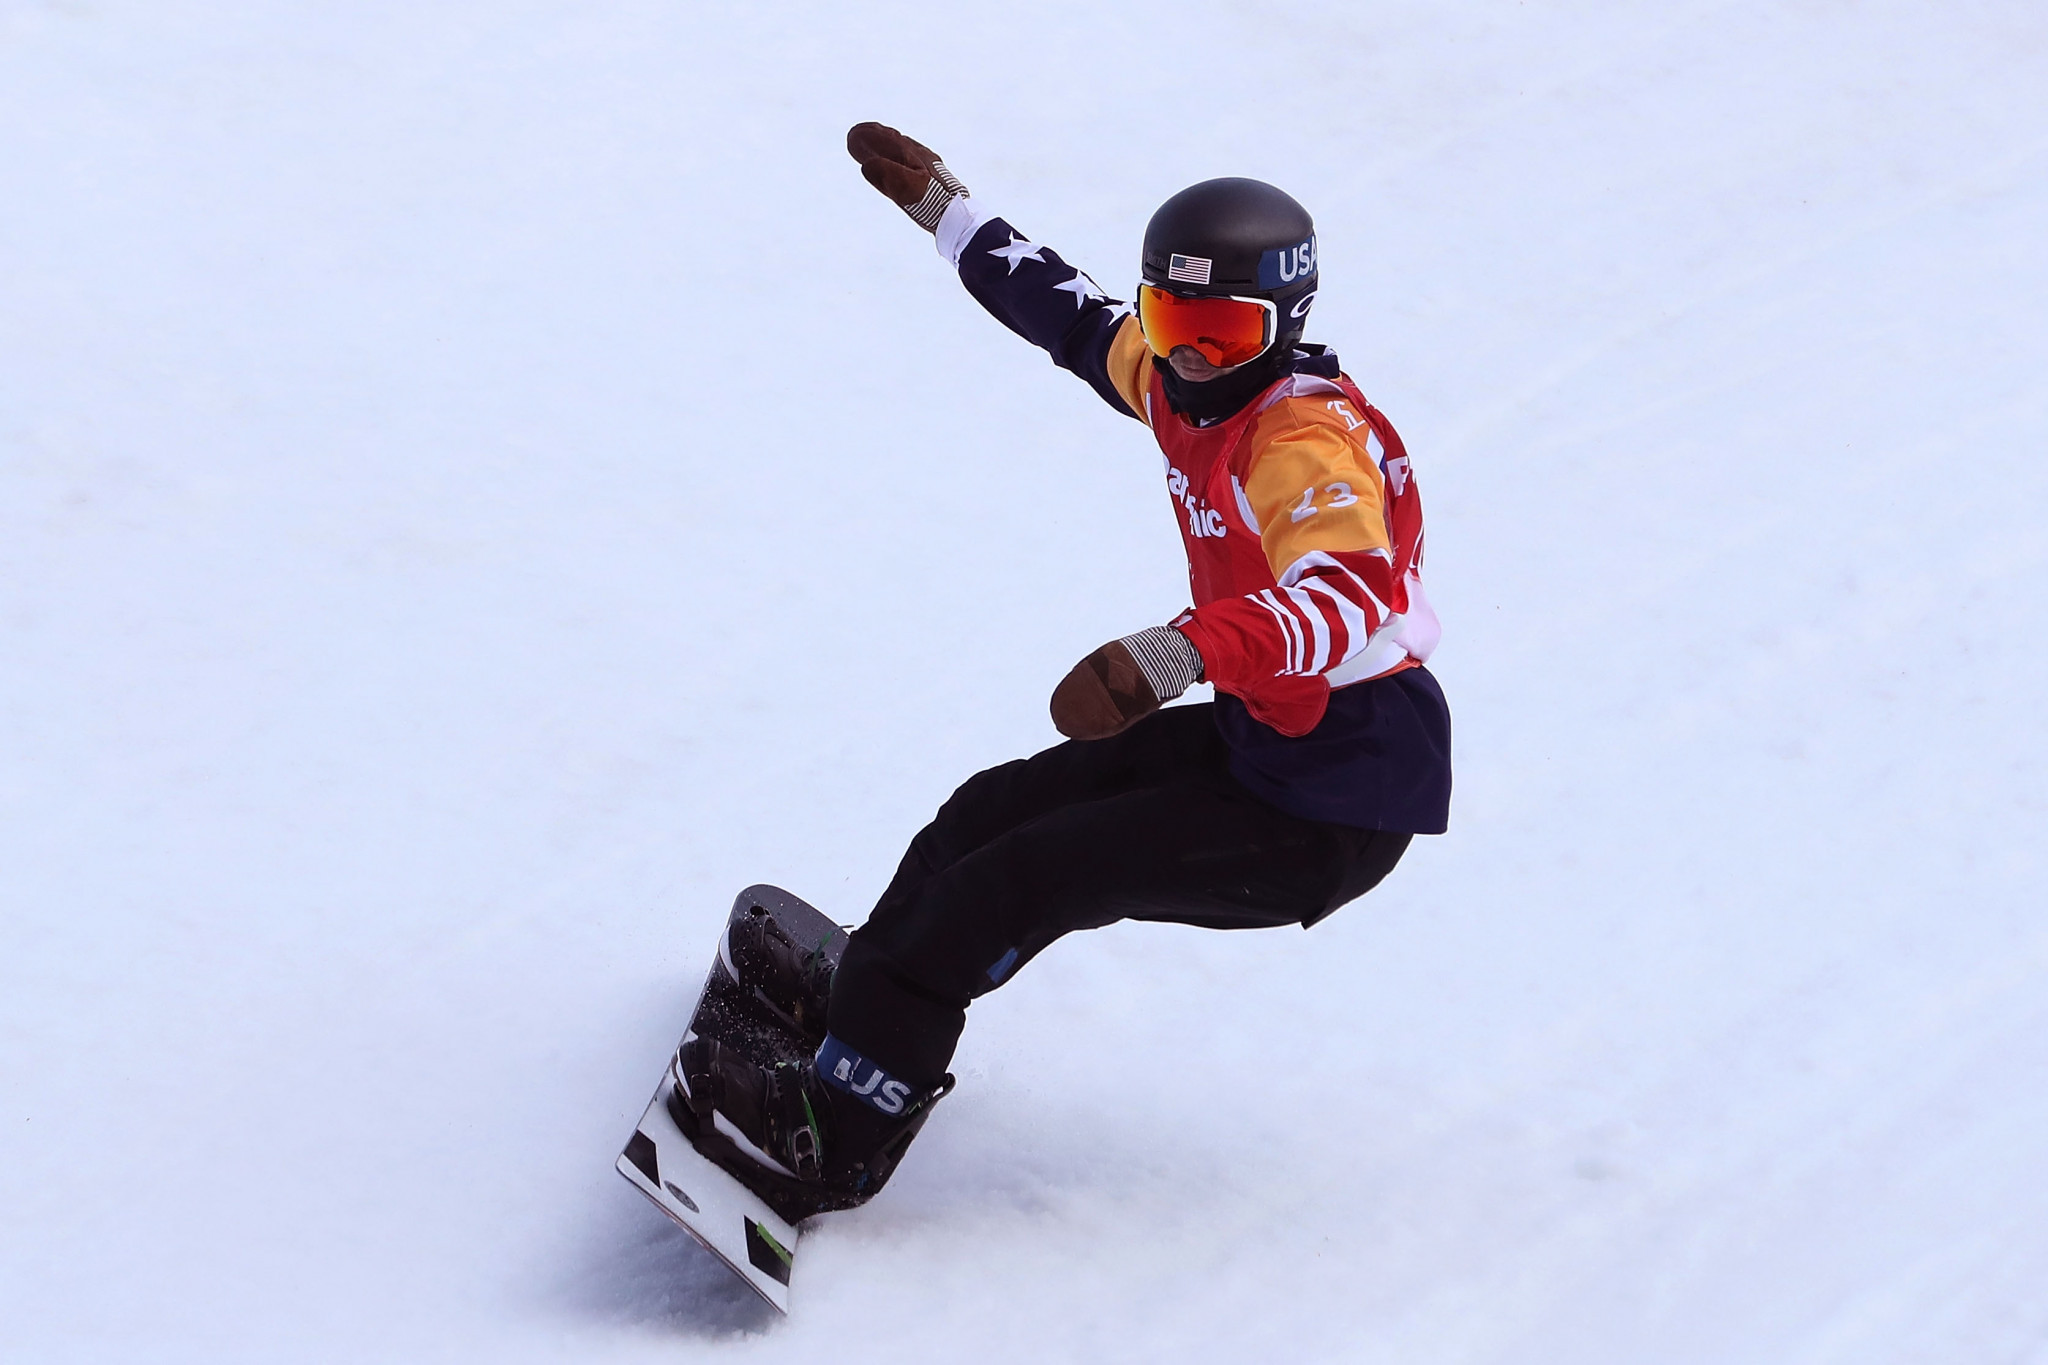 United States claim two golds at World Para Snowboard World Cup Finals